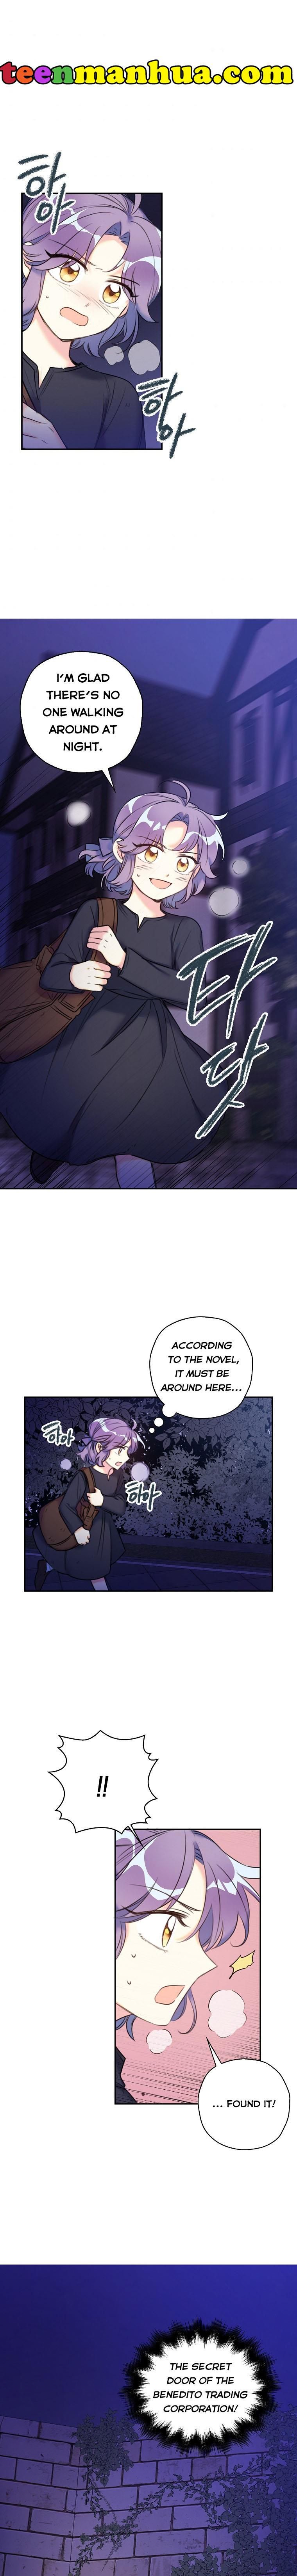 Born As The Daughter Of The Villainess (The Wicked Woman’S Daughter) - Page 1